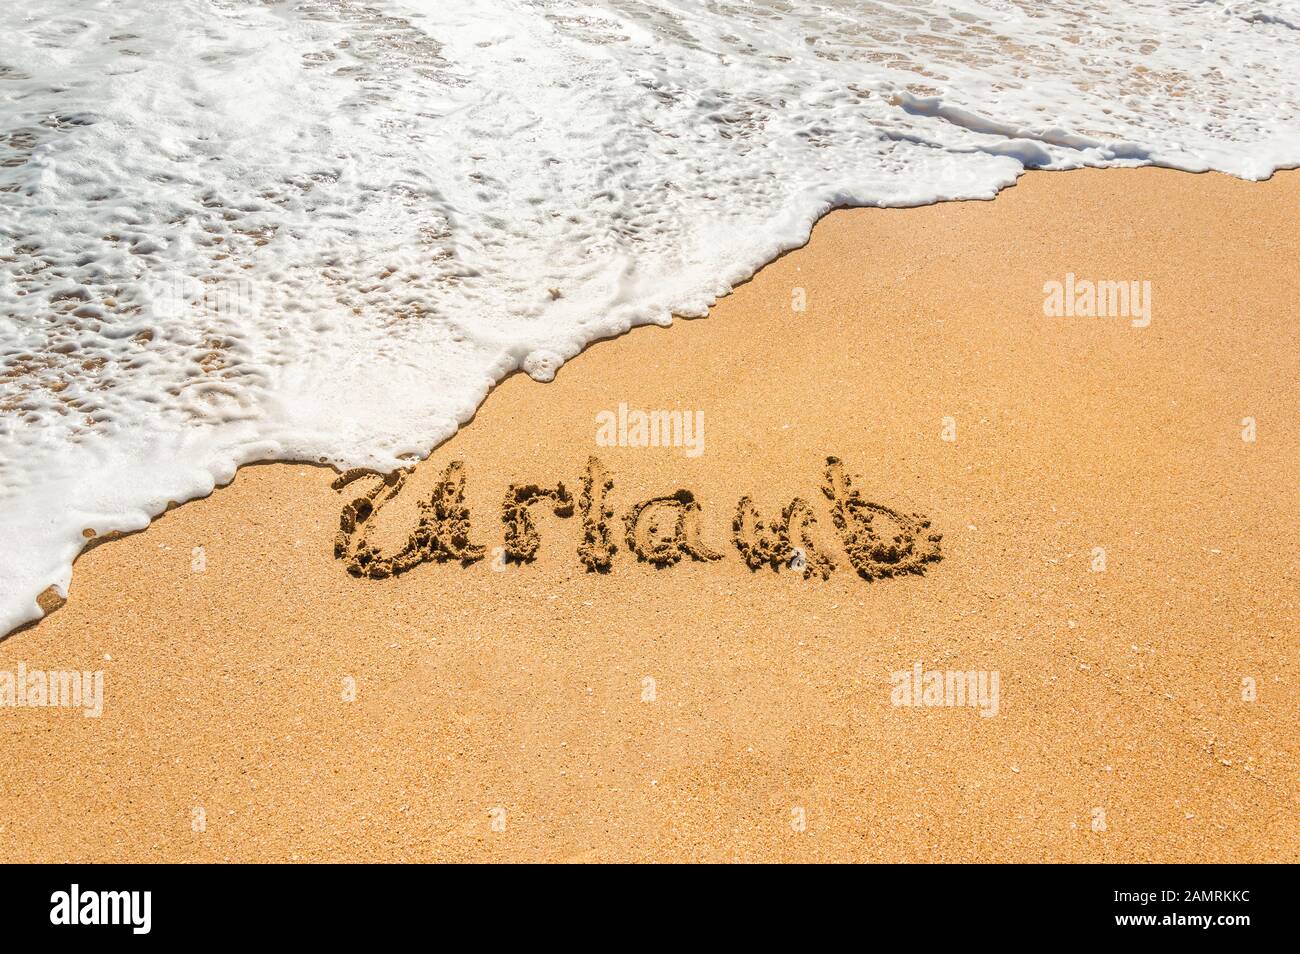 Hand written text in German Urlaub (English translation holidays) on the golden beach sand with coming wave. Concept of summer holidays and vacations Stock Photo